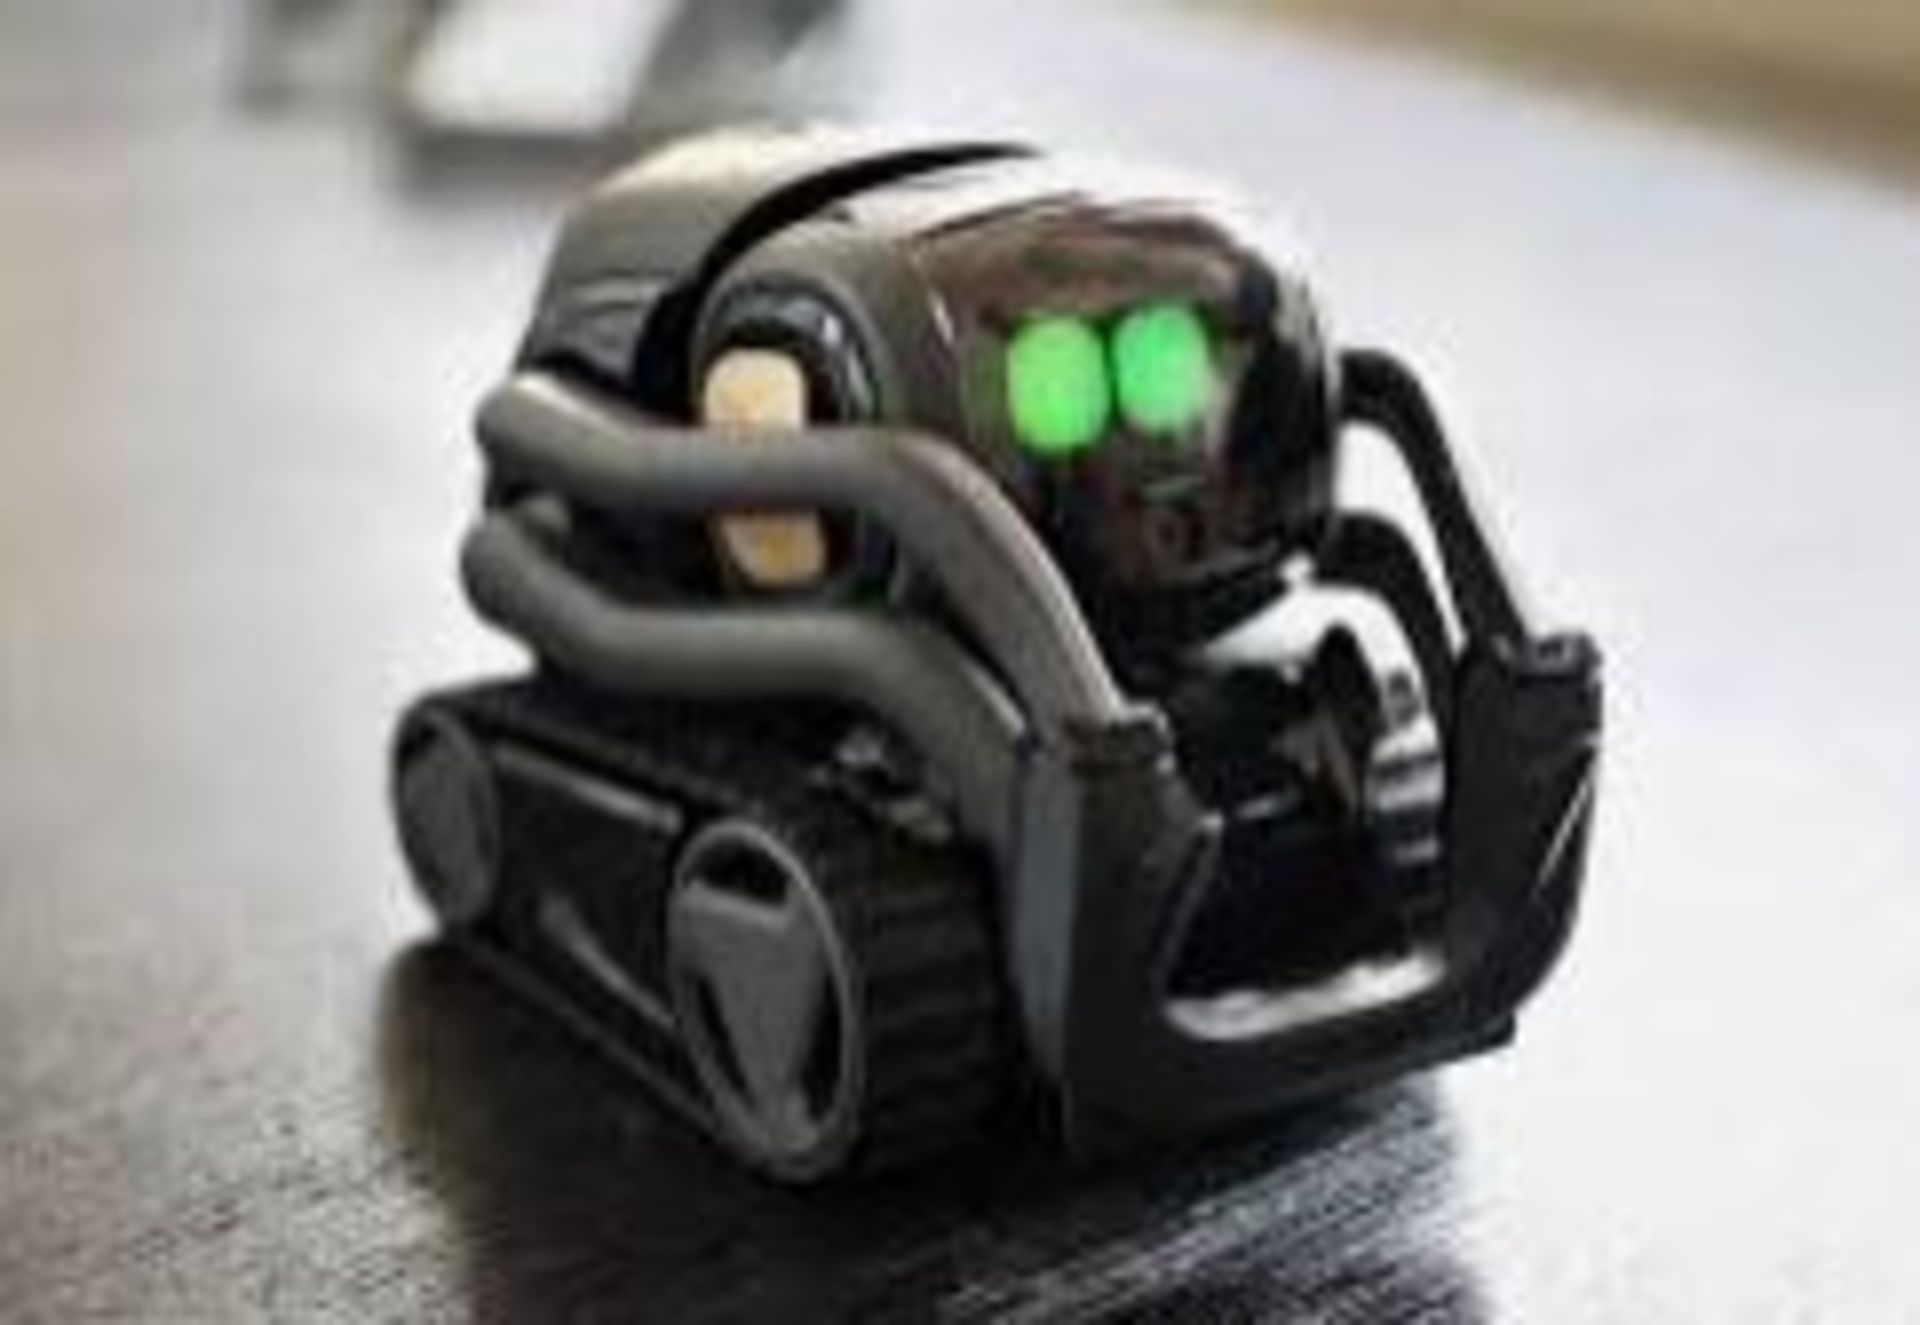 Anki Vector Interactive Camera Enabled Ai Robot (RRP £200) Cloud Connected, Self-Updating & S...